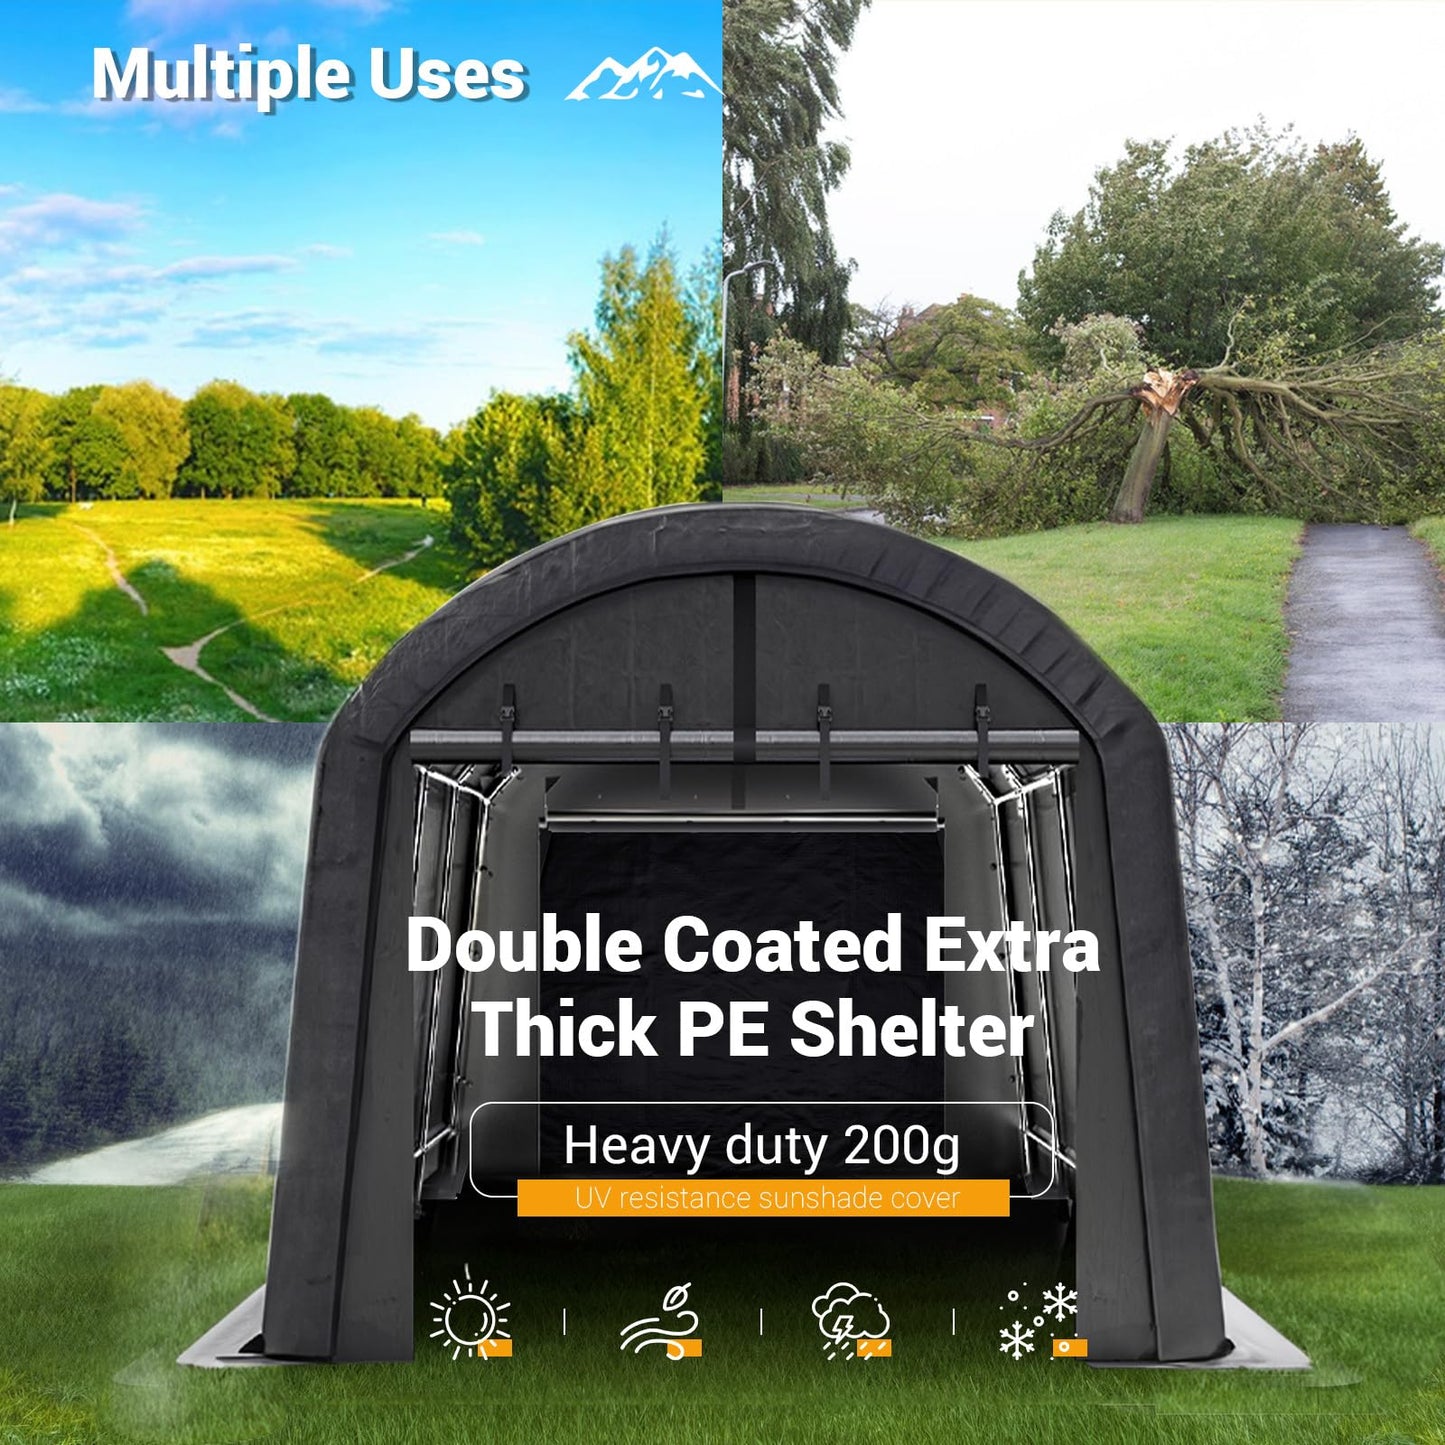 UDPATIO 10 x 20 ft Carport, Heavy Duty Shelter, Outdoor Portable Storage Tent with Sunshade Waterproof Thick Canopy Cover 10x20 FT